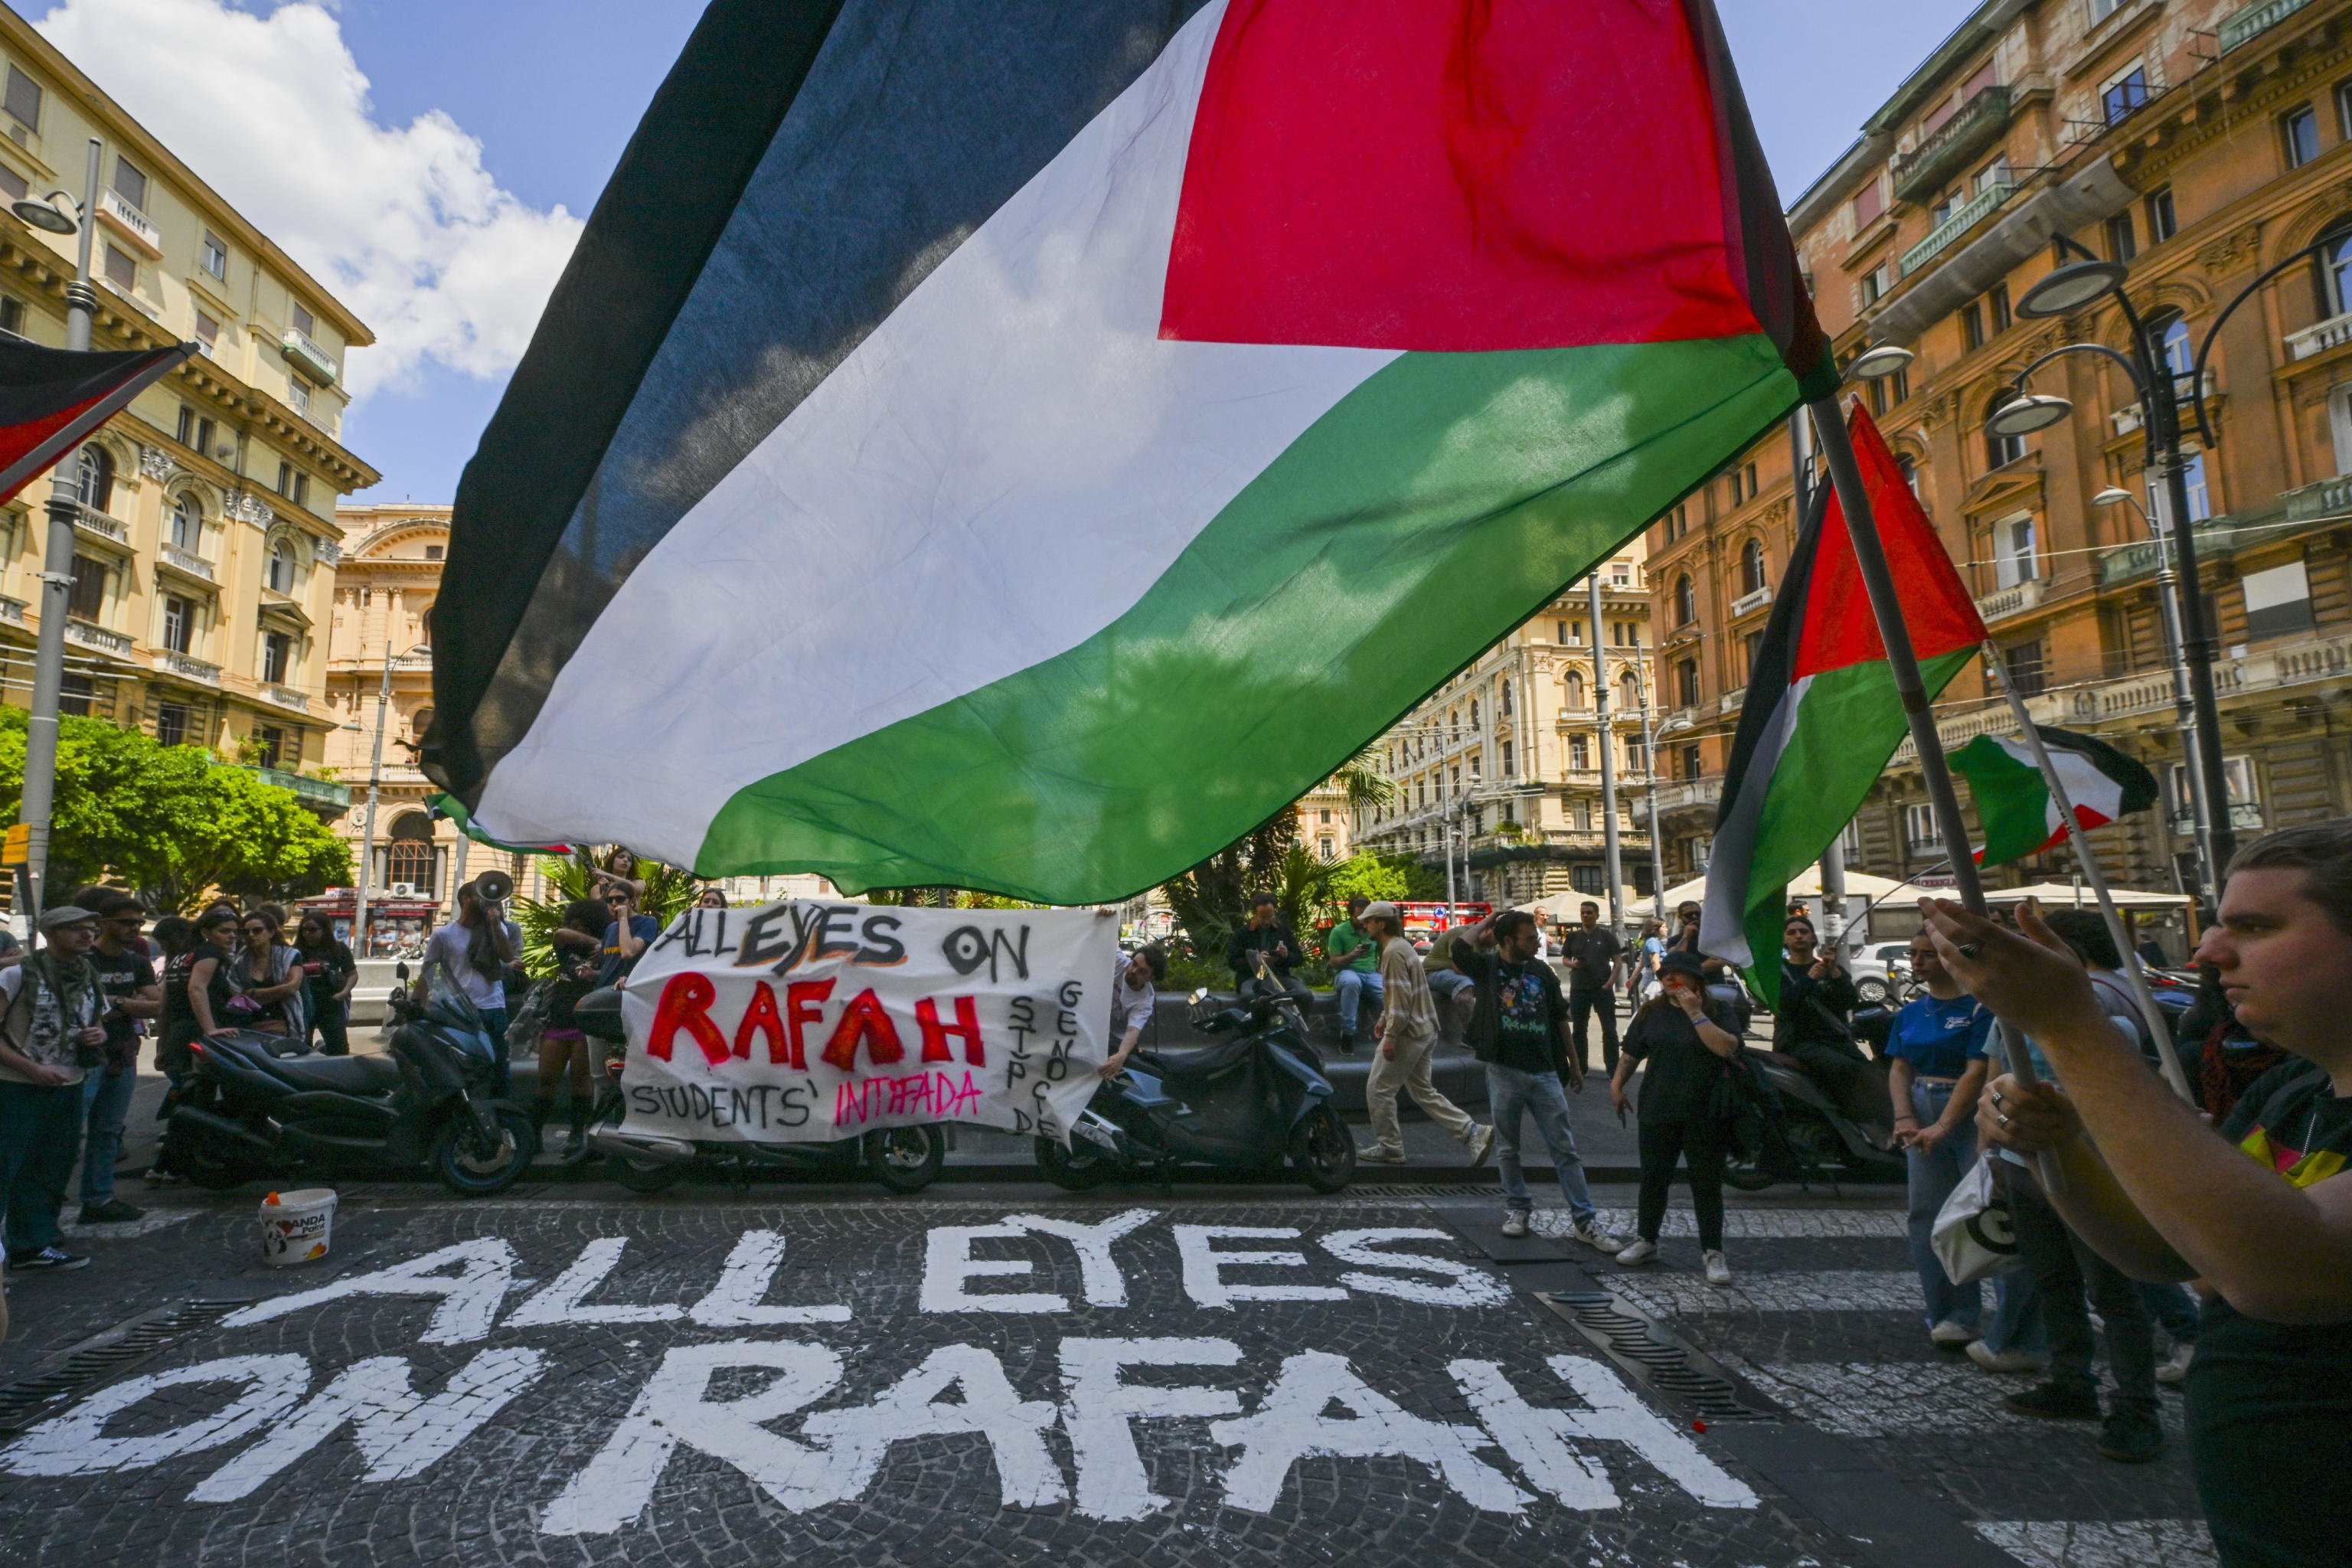 Members of the Student Network for Palestine protest outside the headquarters of an Israeli shipping and logistics company, in Naples, Italy, on May 10. Photo: EPA-EFE